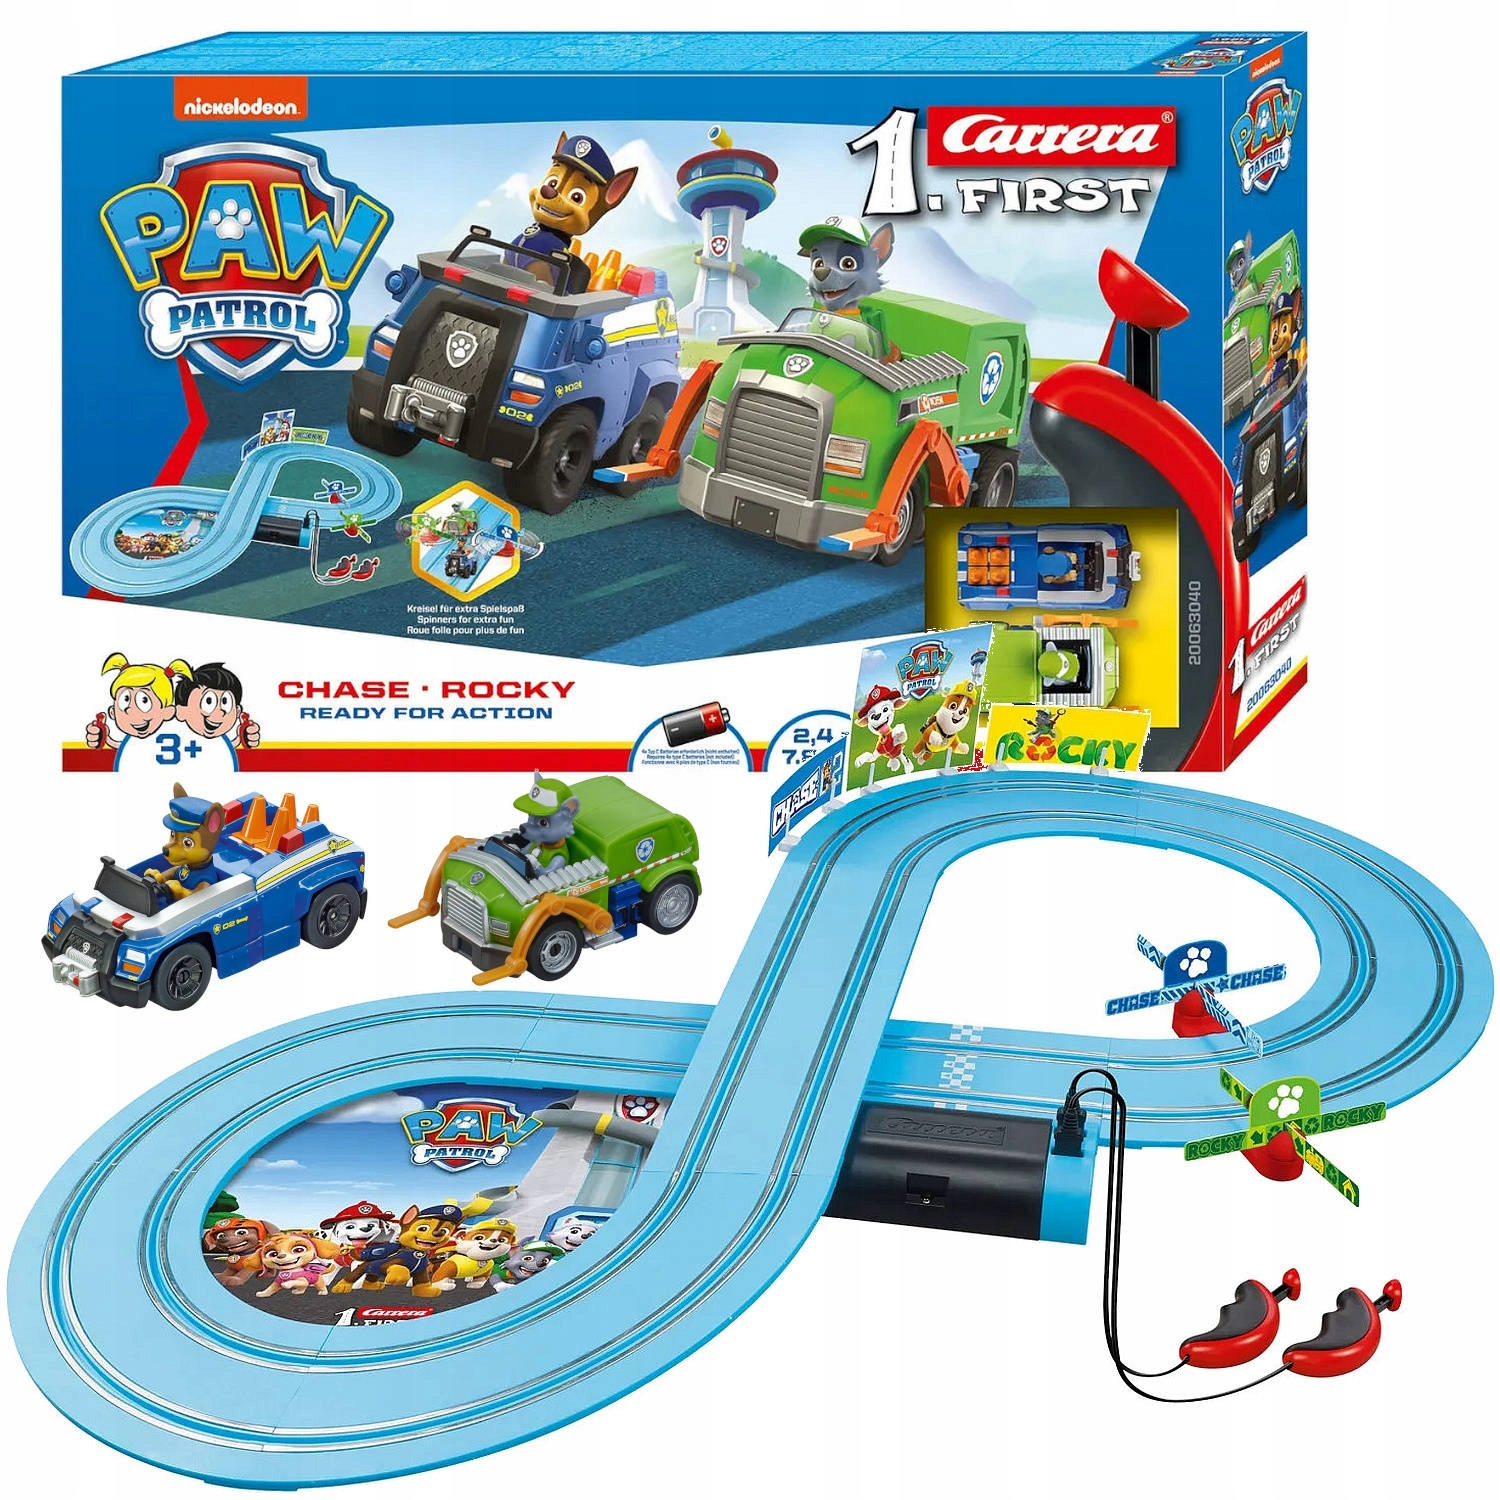 Carrera FIRST PAW Patrol Ready For Action